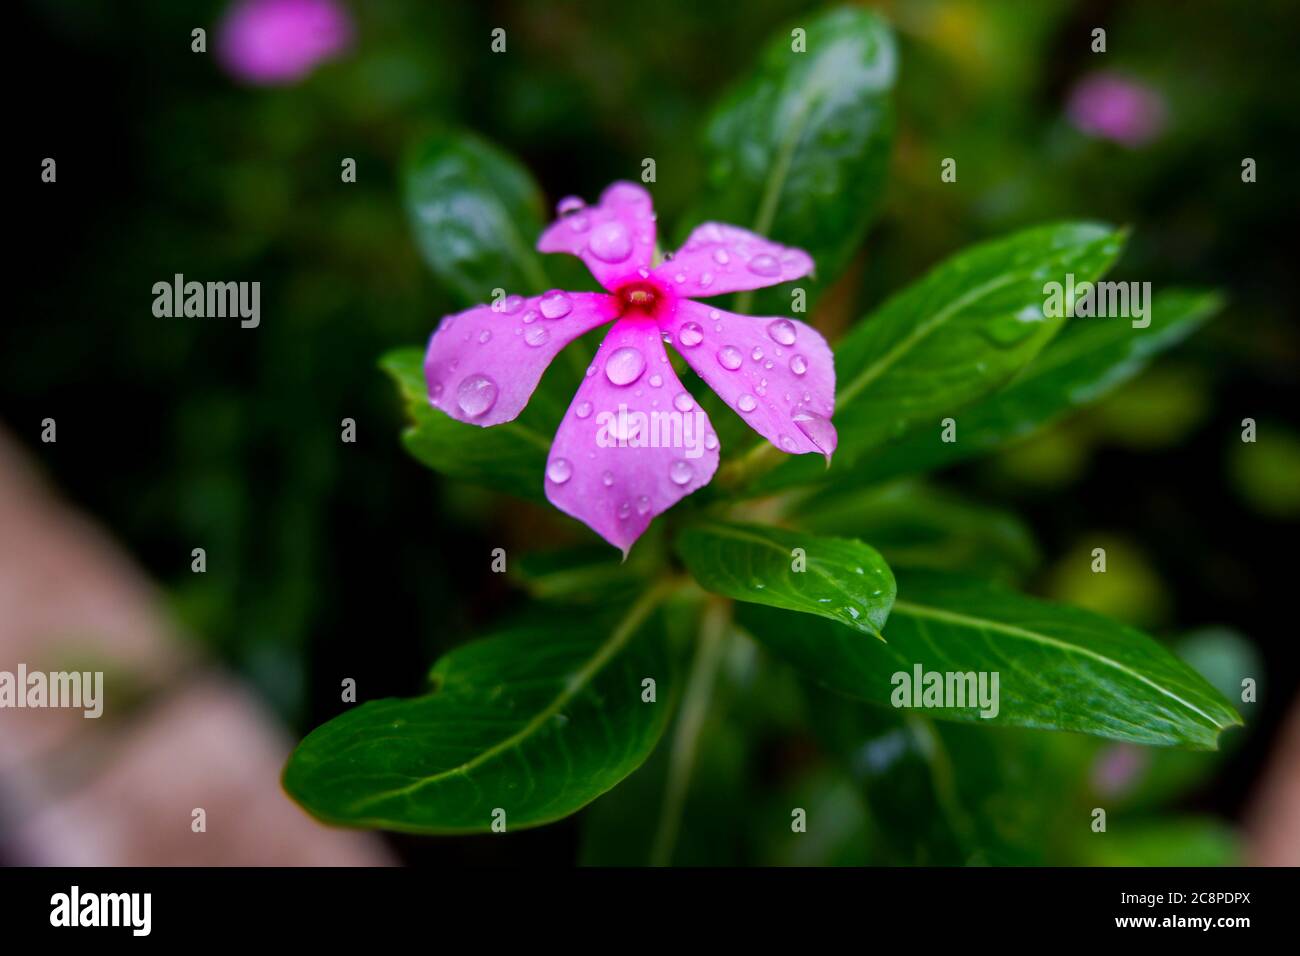 a close shot of pink periwinkle flower & leaves on rainy water droplets in home garden Stock Photo